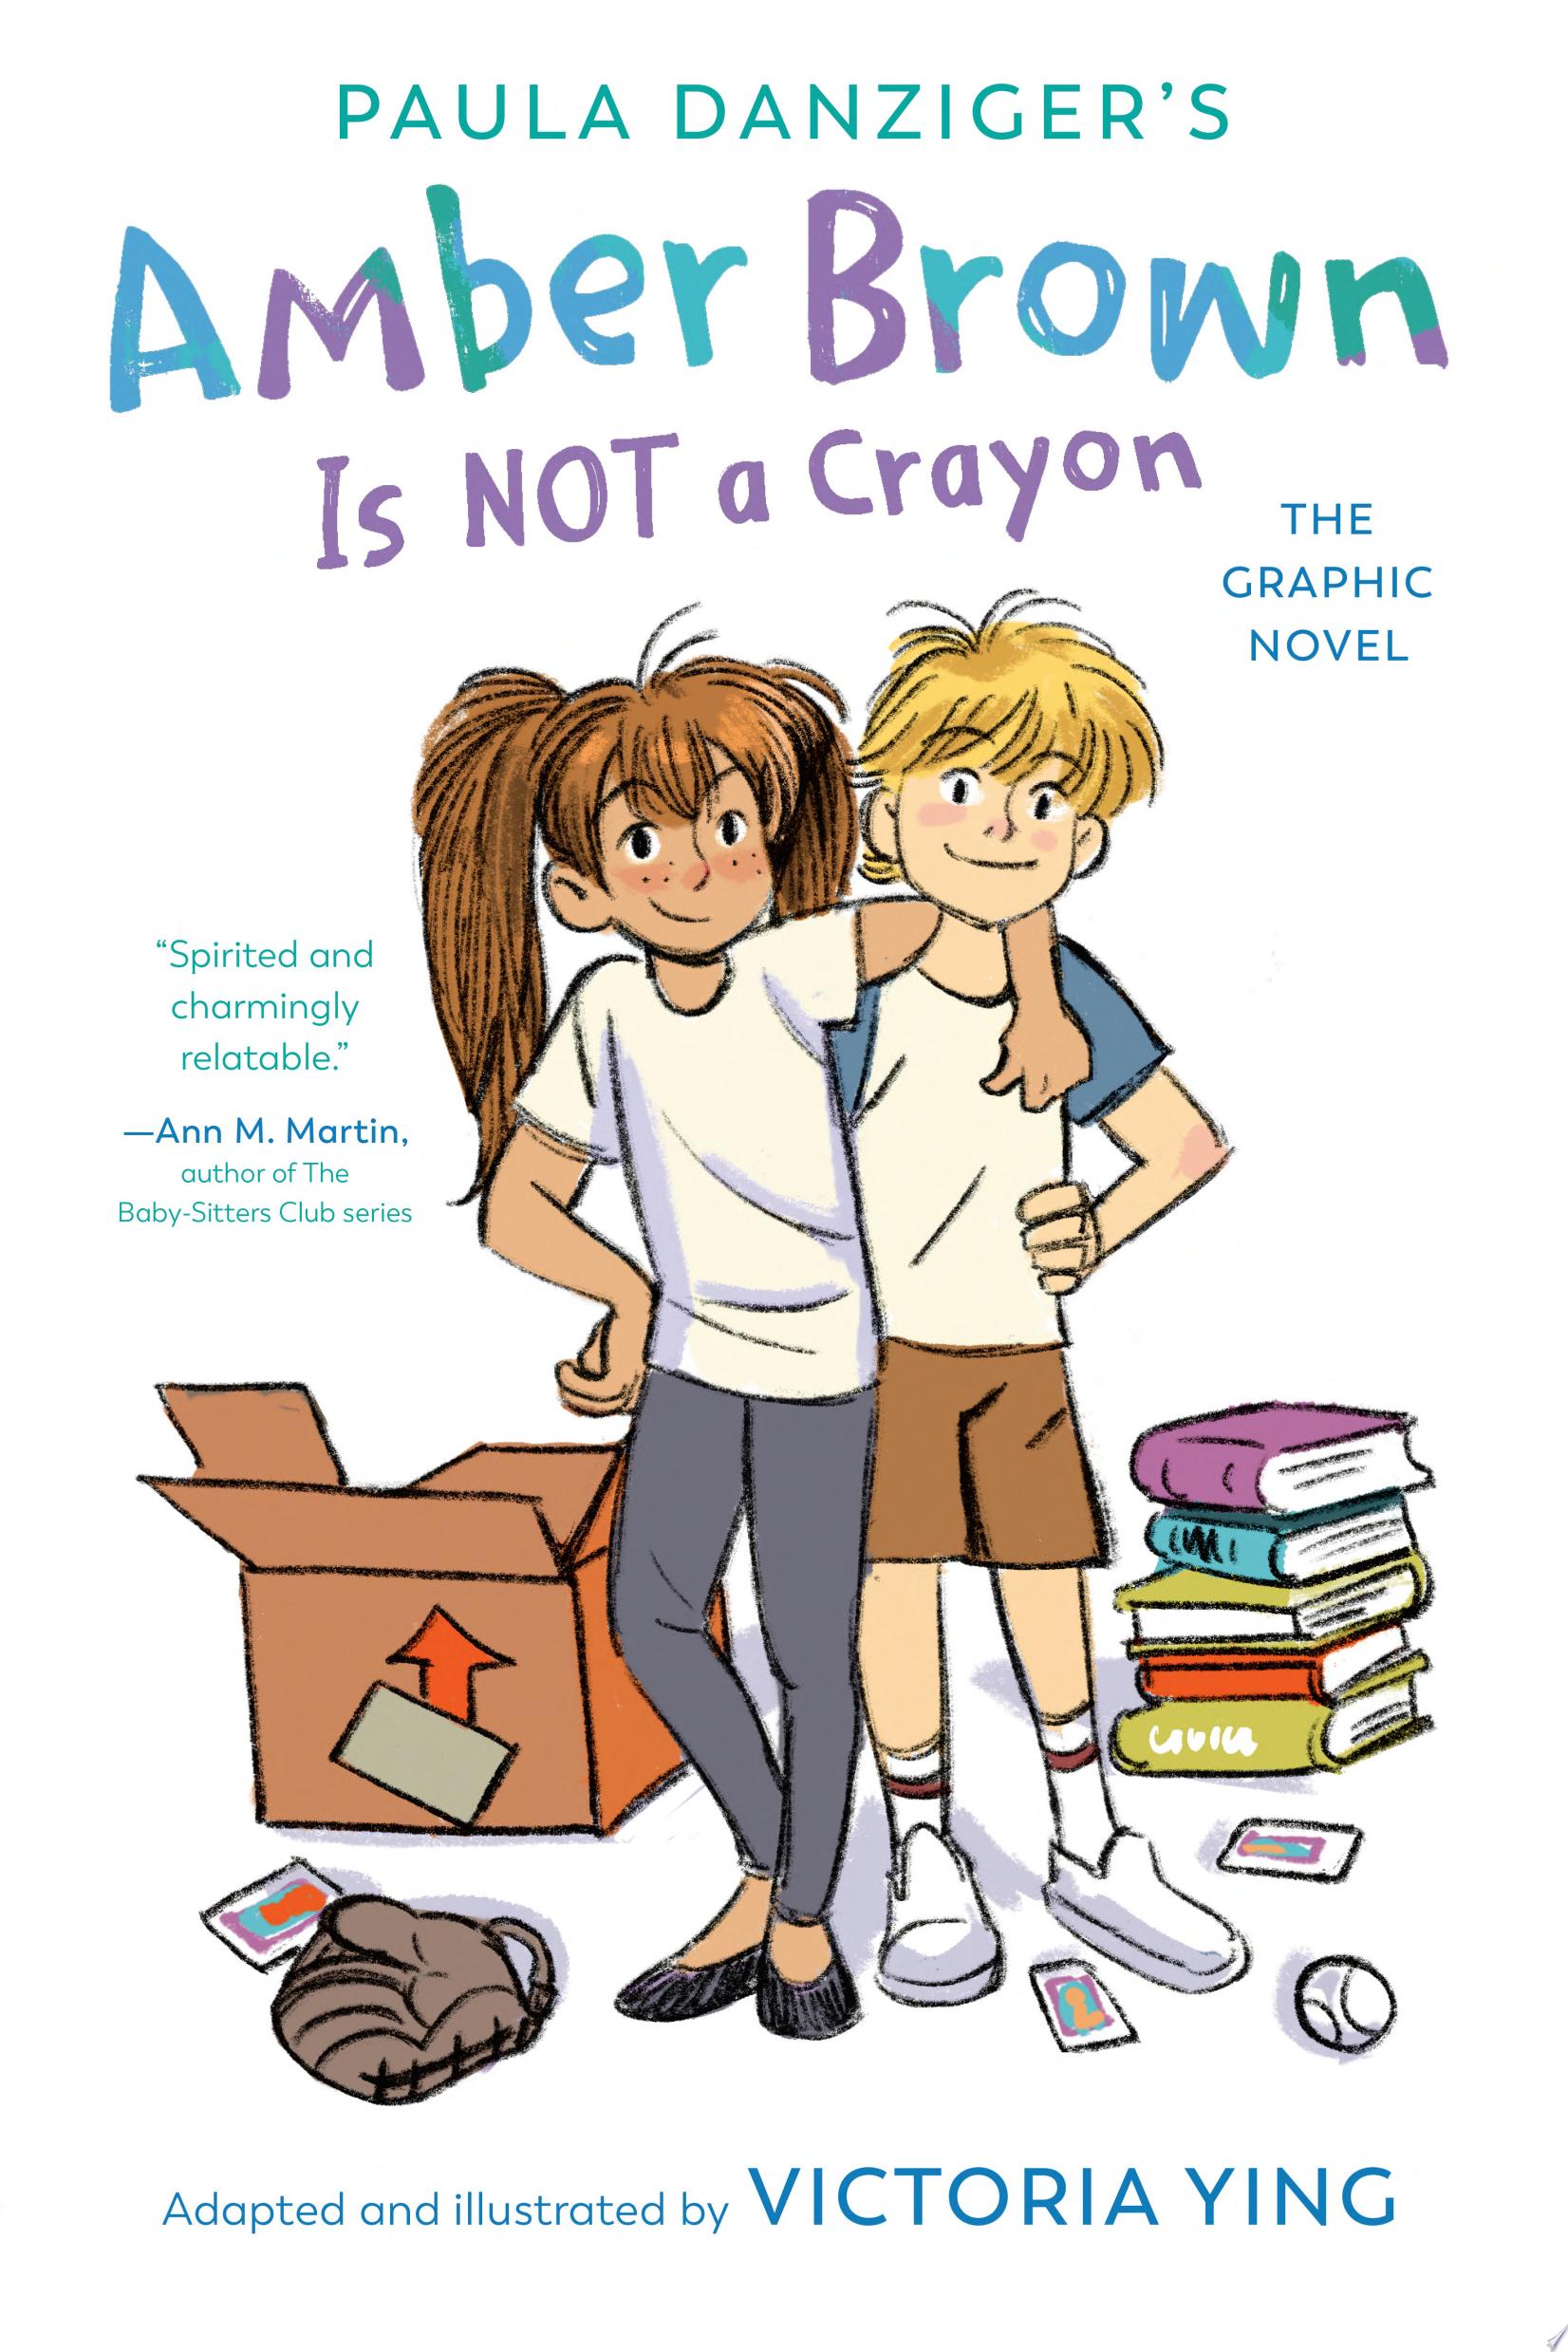 Image for "Amber Brown Is Not a Crayon: The Graphic Novel"